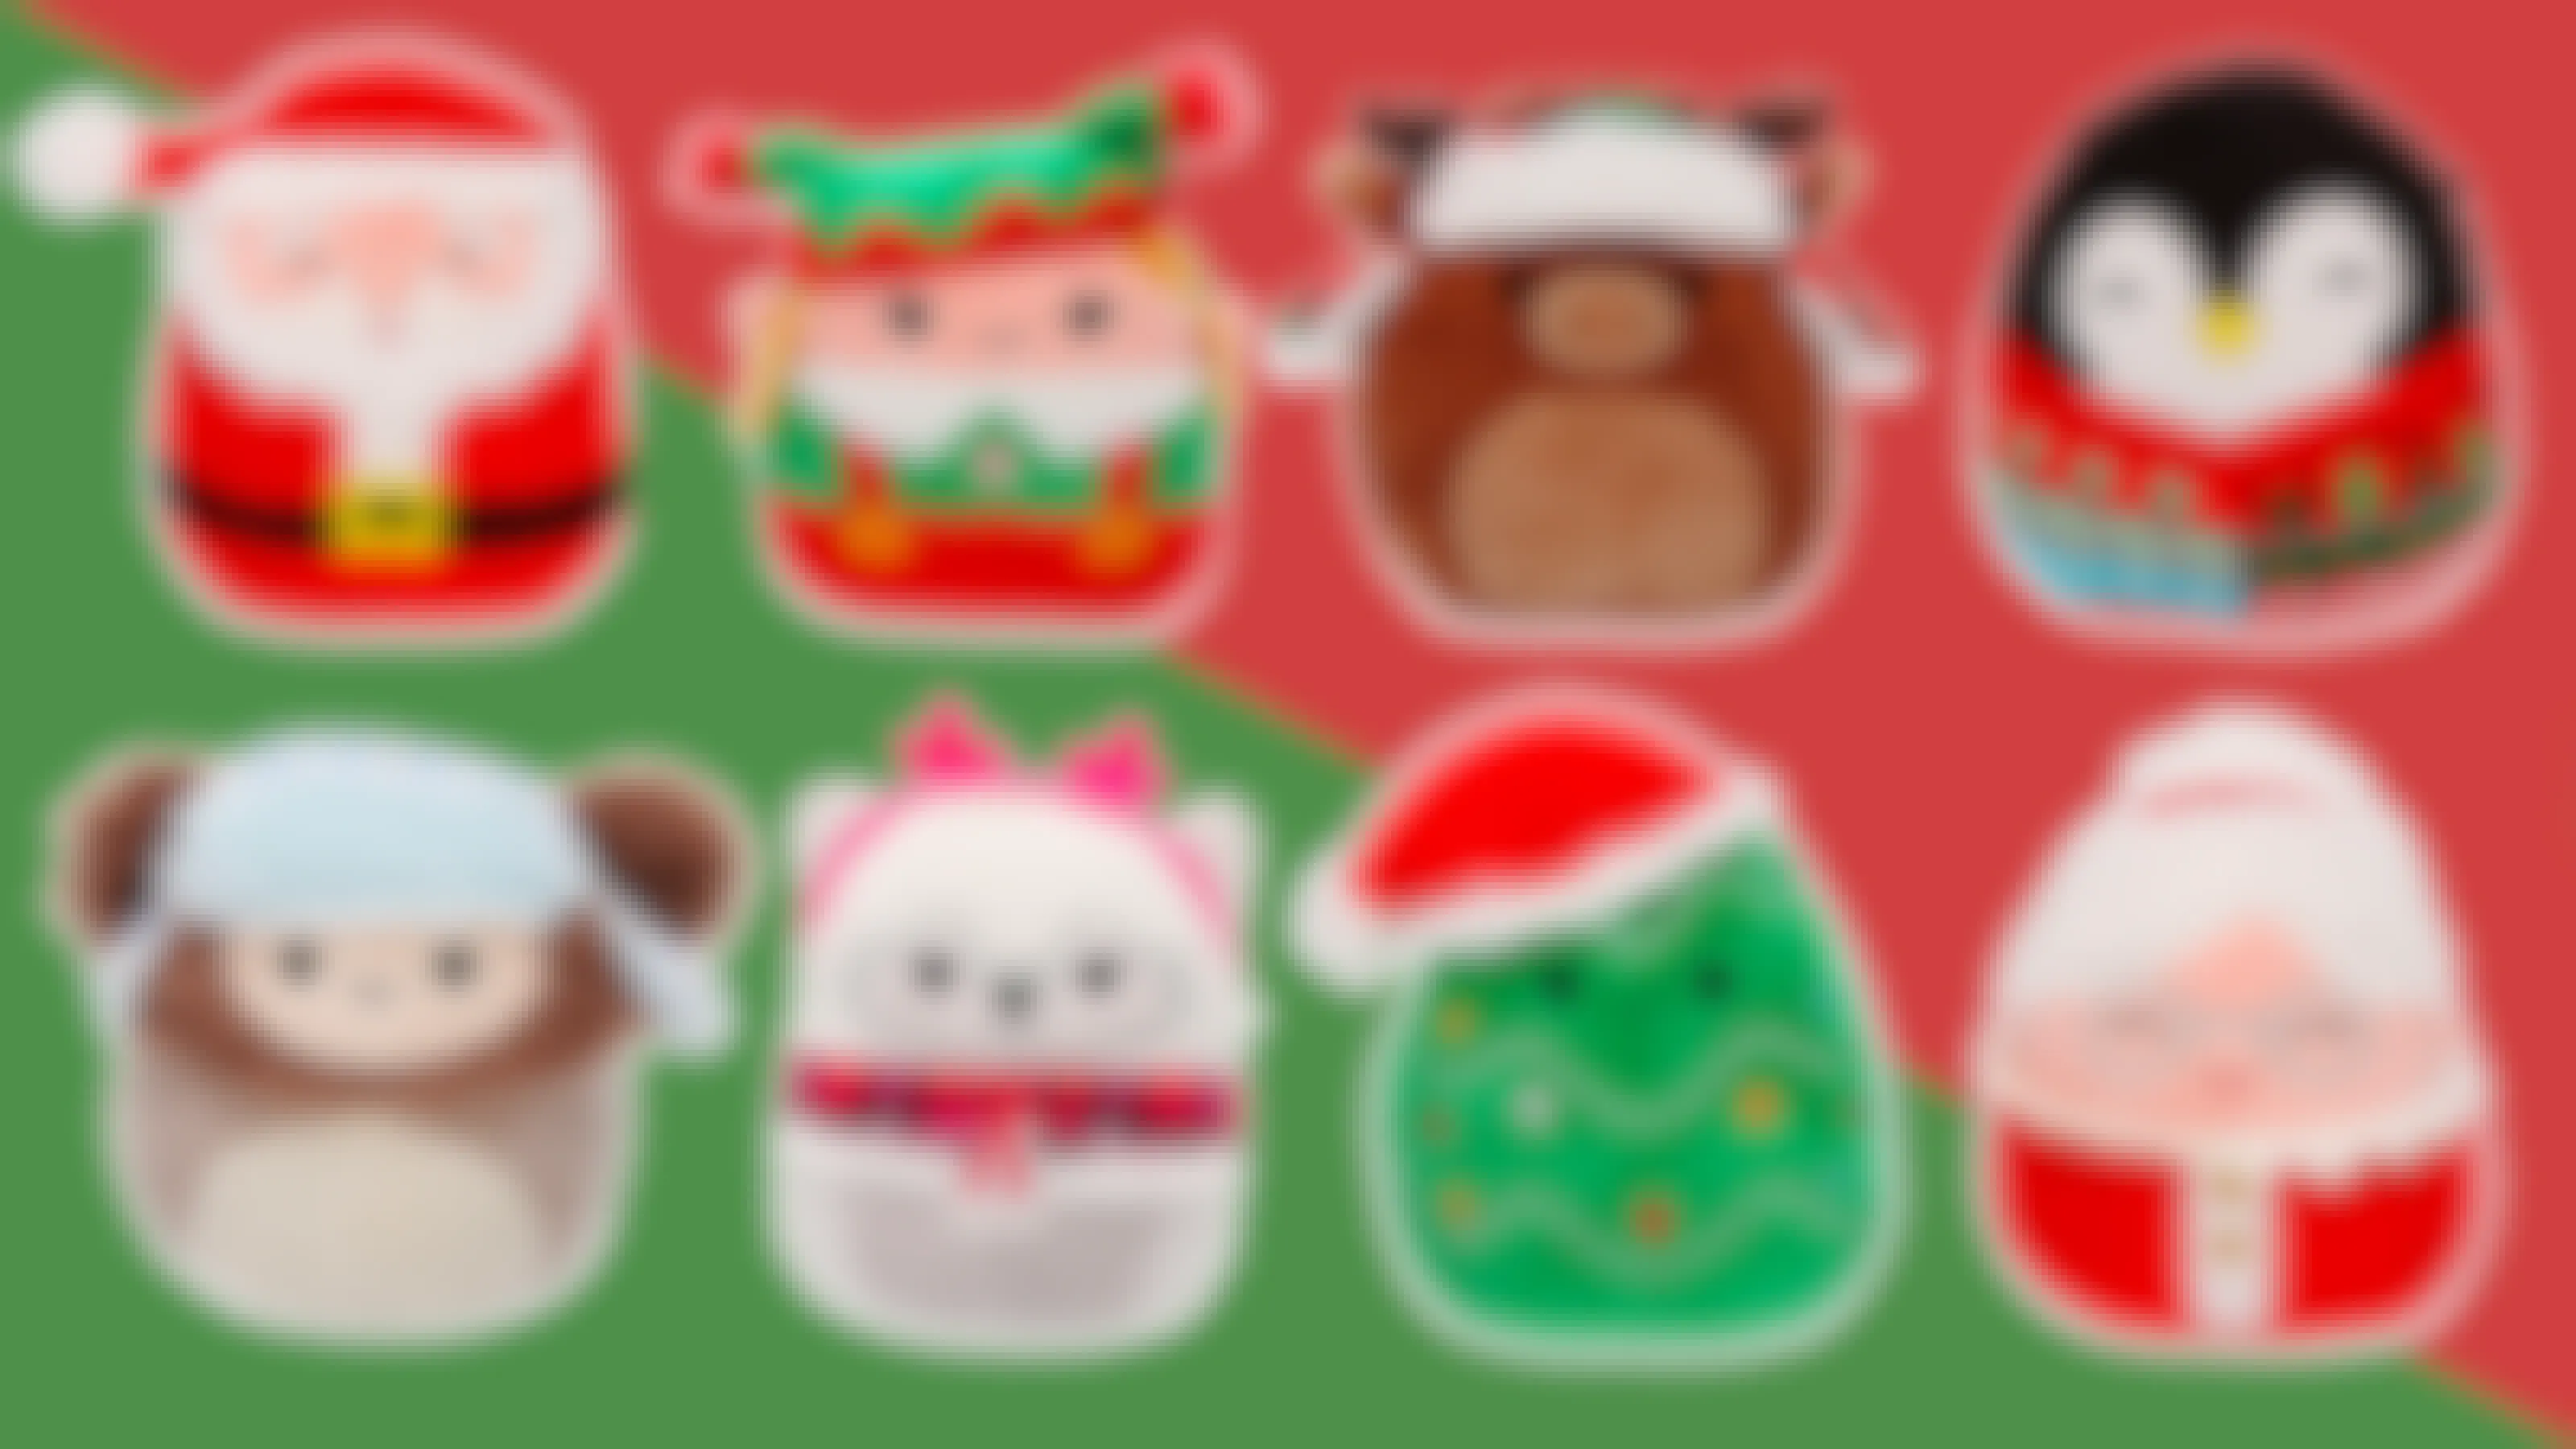 holiday christmas themed squishmallows santa-elf-reindeer-penguin-benny-fox-tree-mrs-claus